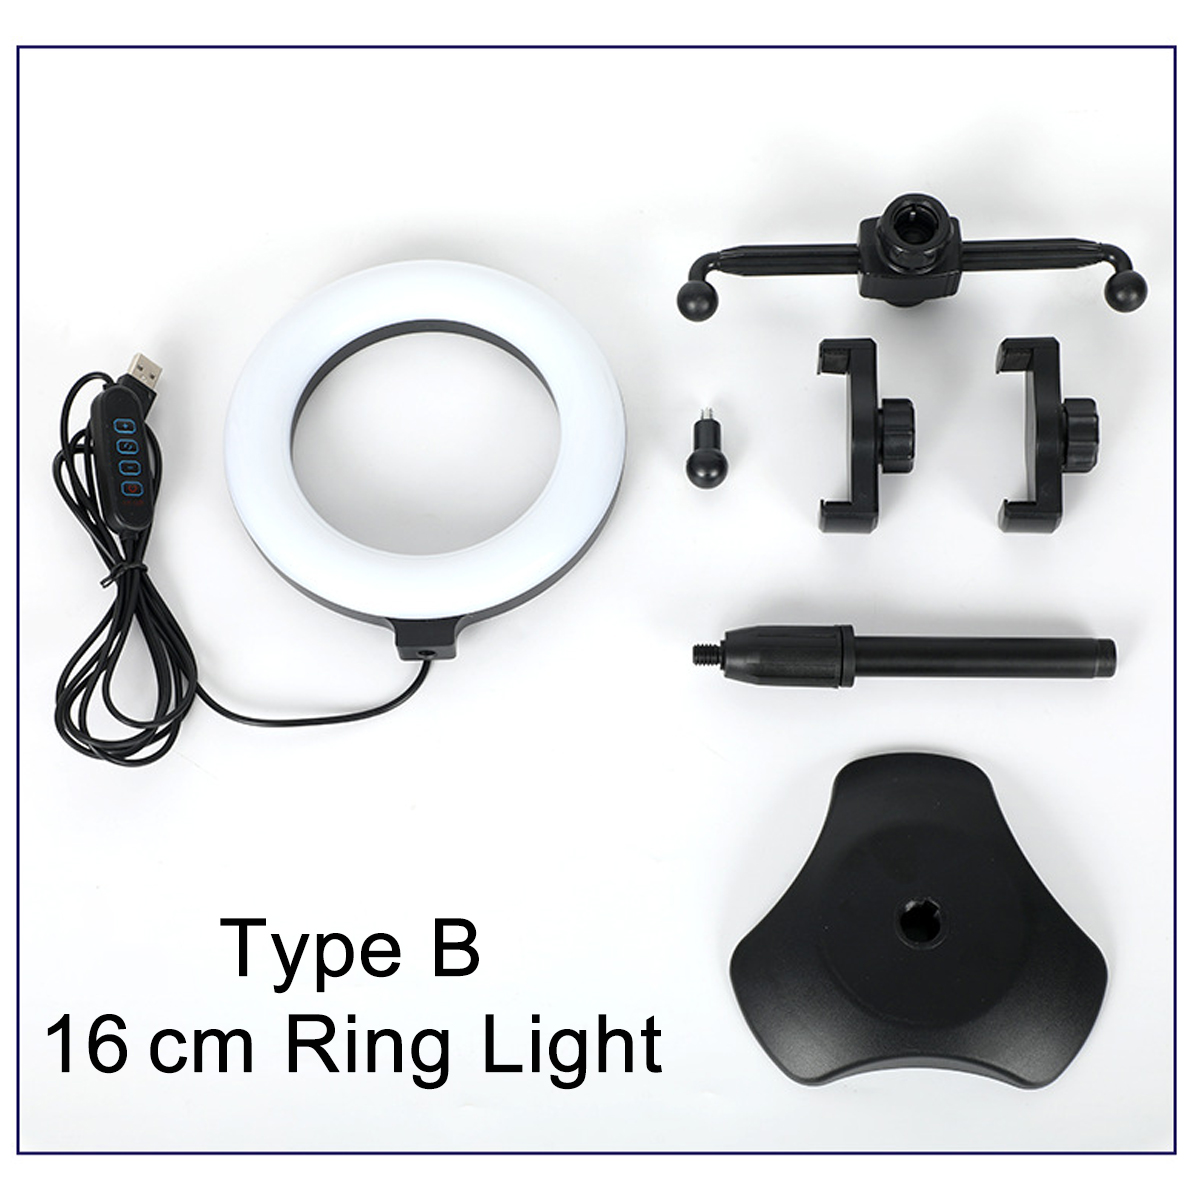 916-cm-3-Modes-of-Color-Temperature-Color-Ring-Fill-Light-with-Dual-Mobile-Phone-Holder-YouTube-Tikt-1881126-13